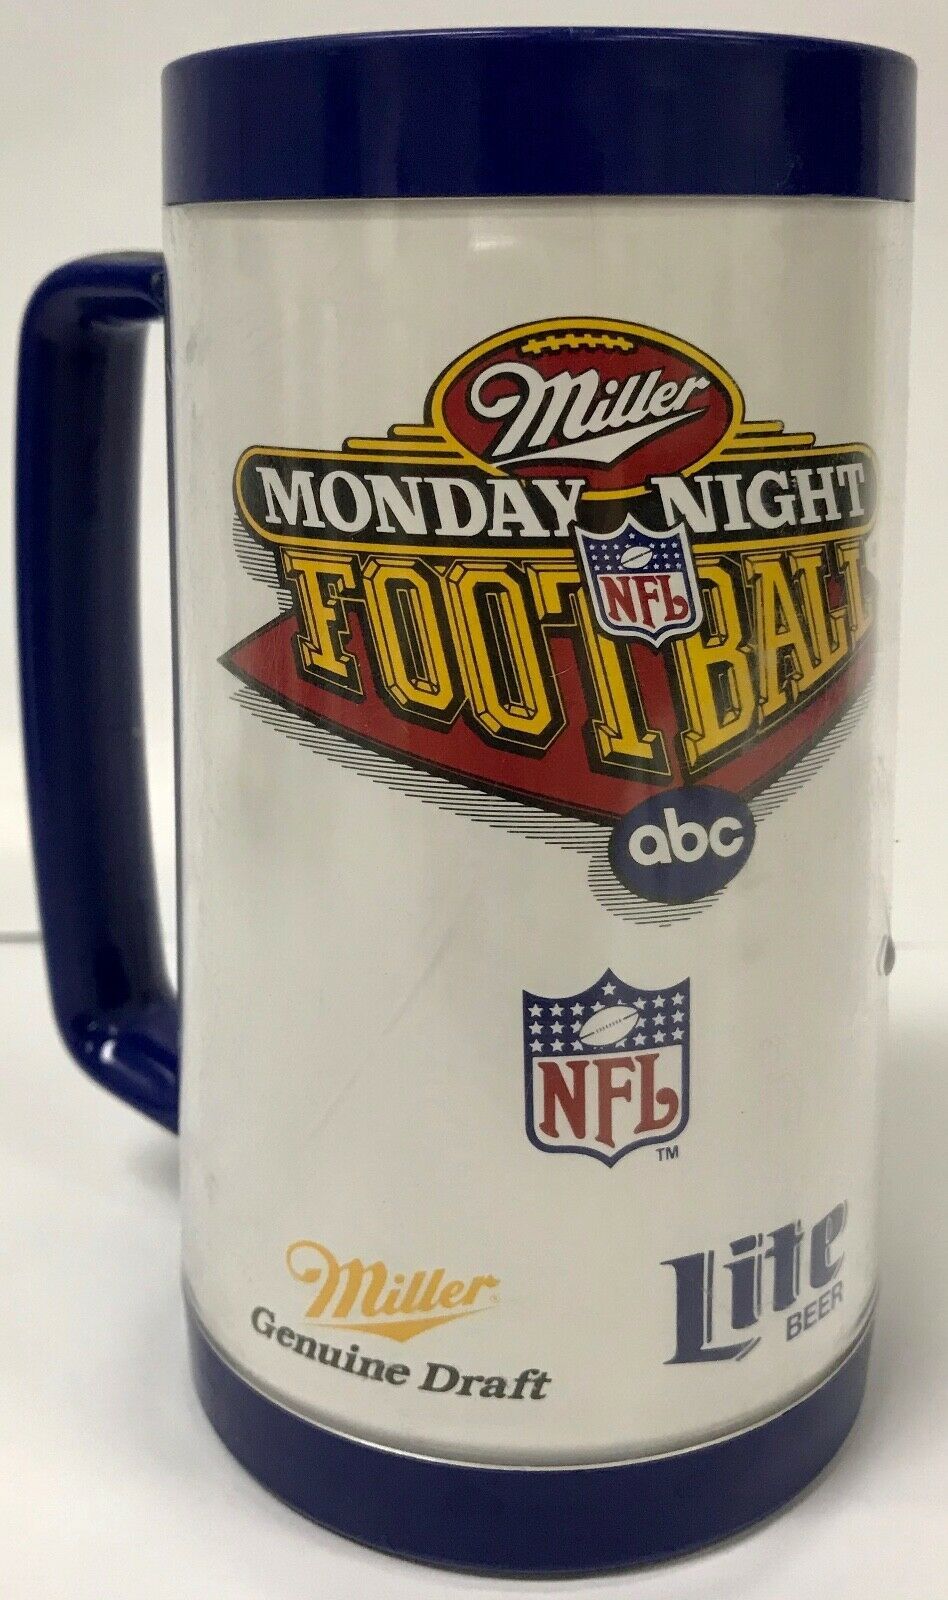 Primary image for Miller Beer ABC Monday Night Football NFL Vintage INSULATED Beer Mug Retro